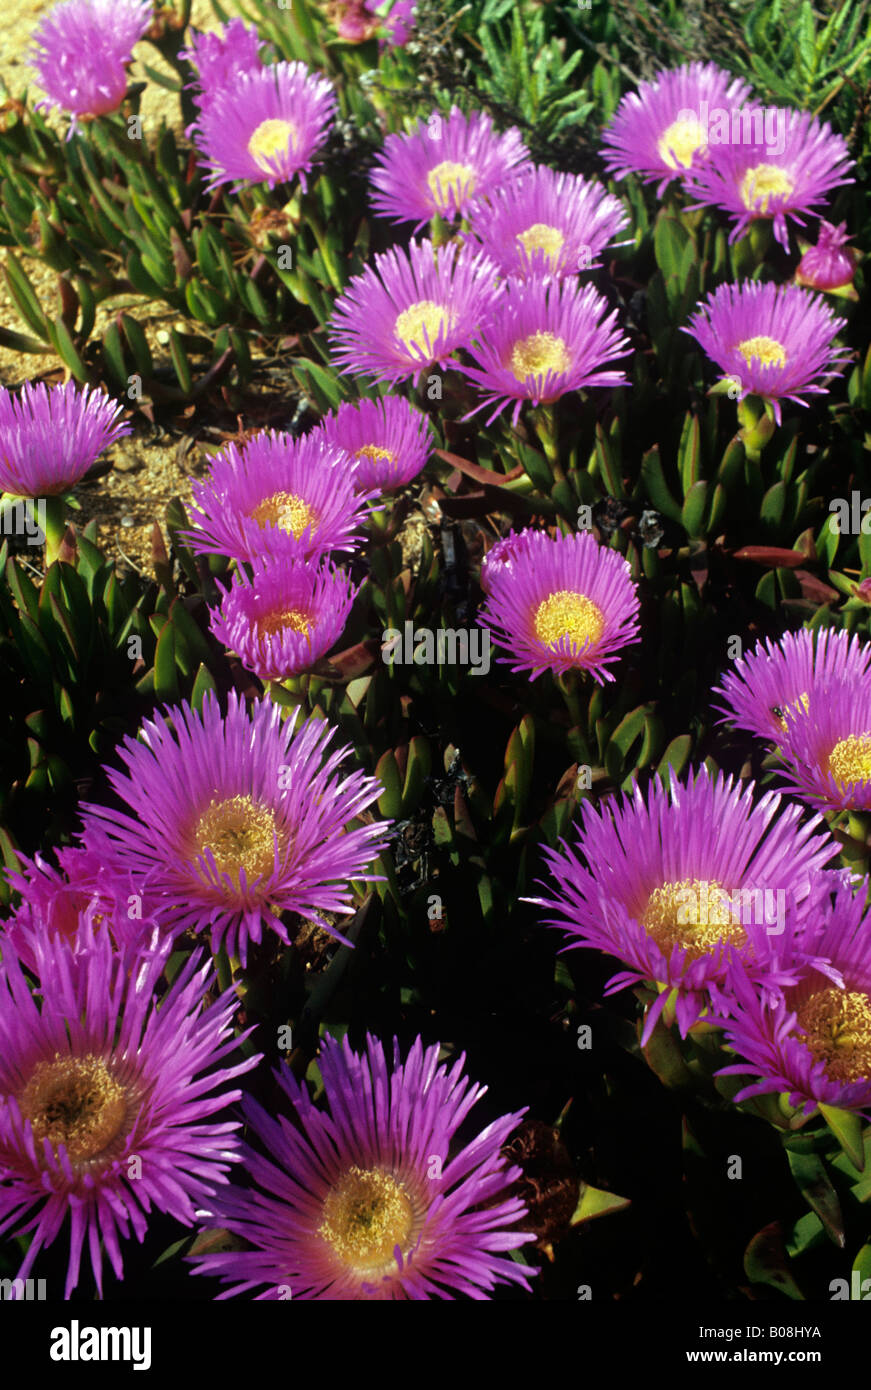 pink or cerise flowers with yellow daisy like centres on mat of low thin pointed succulent stems Stock Photo